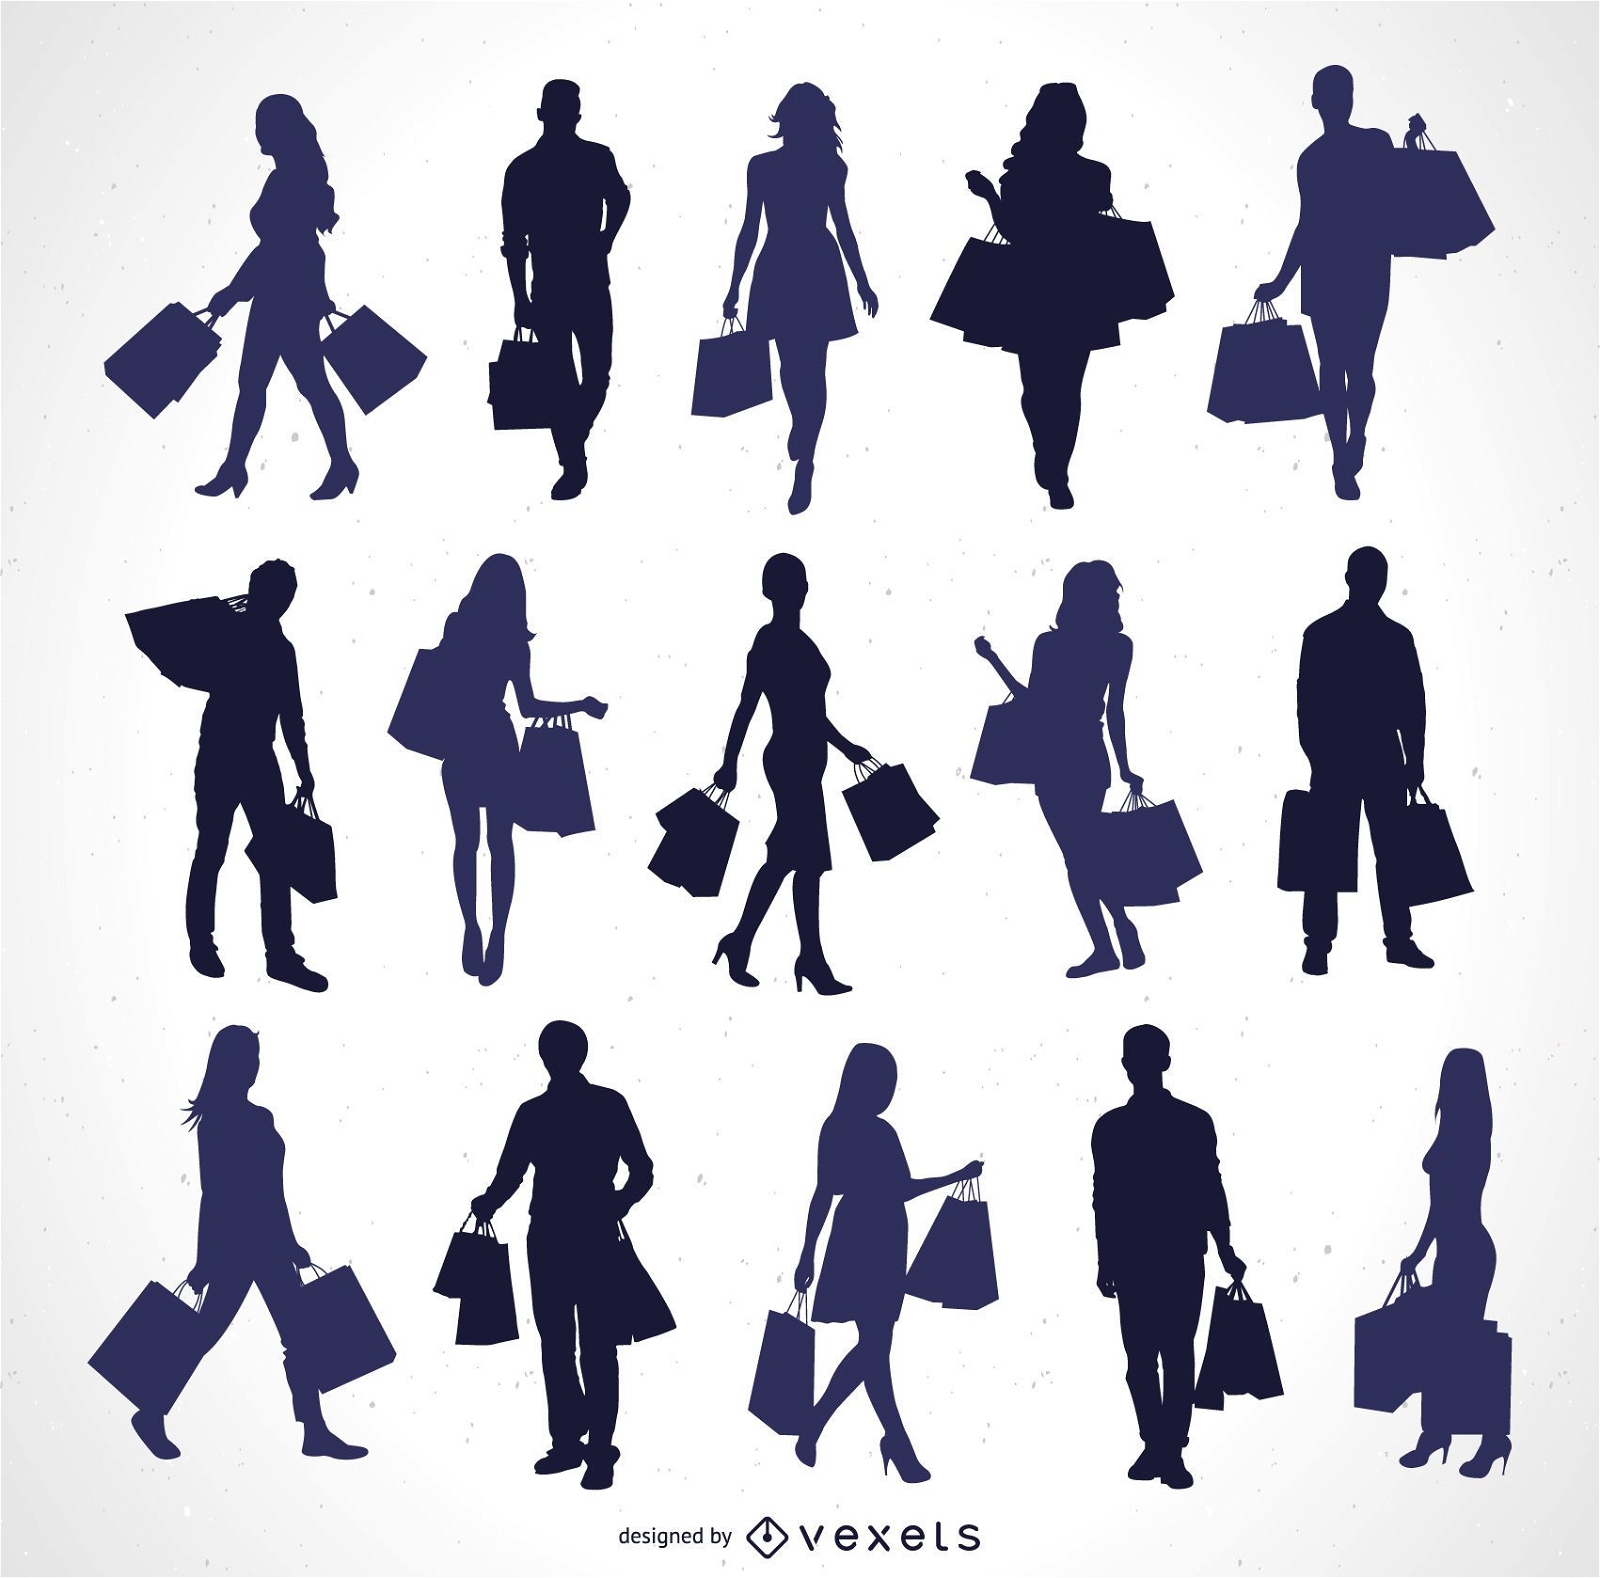 Silhouettes of people with shopping bags